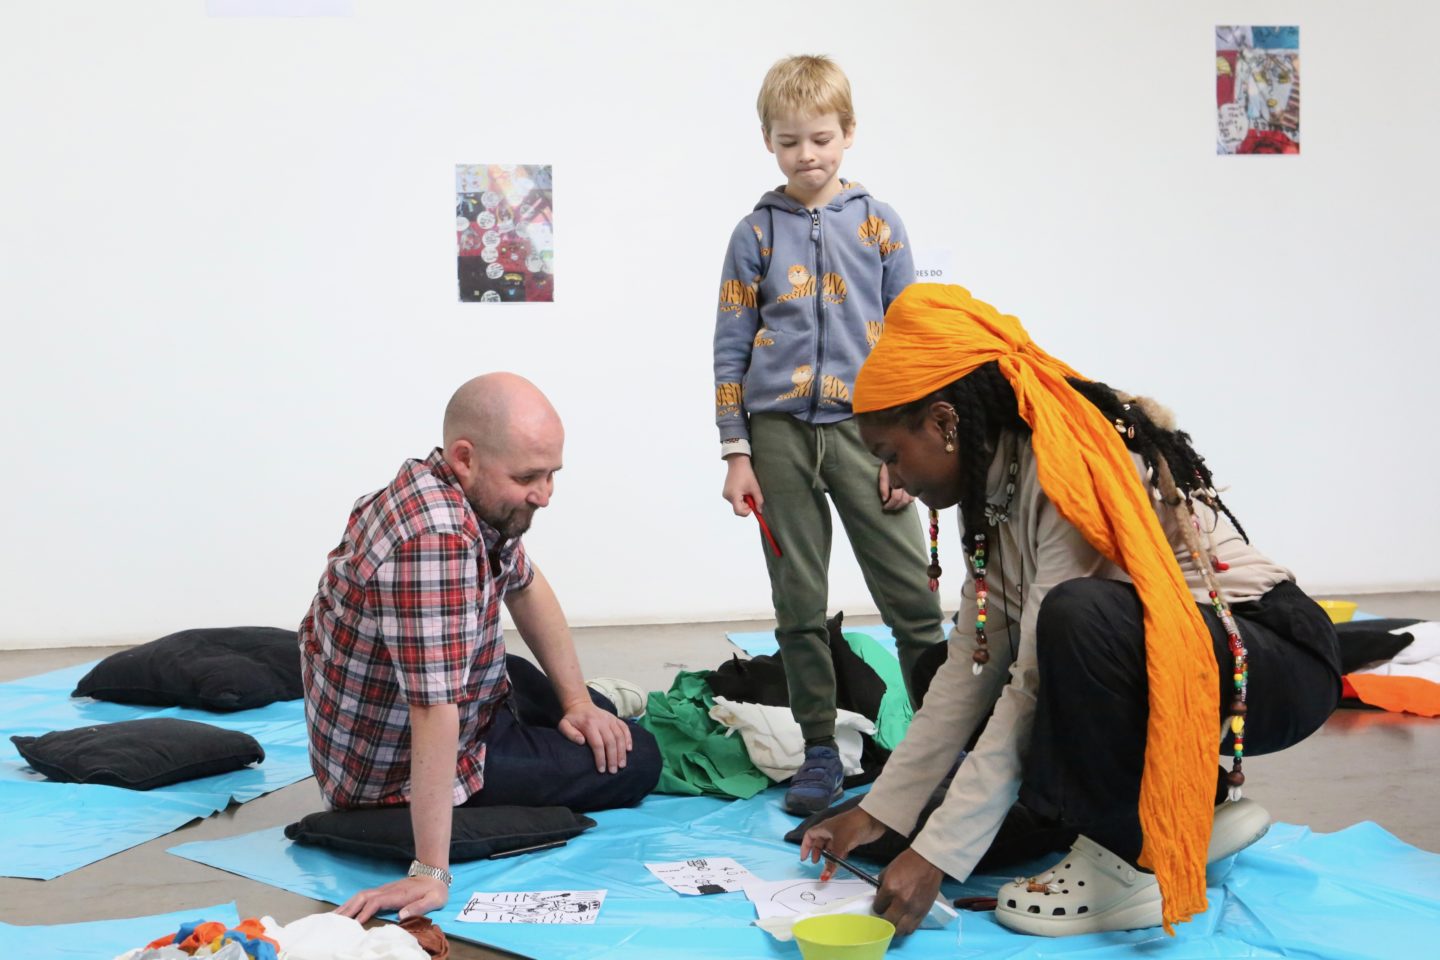 An artist teaches creative activities to a young boy and man.